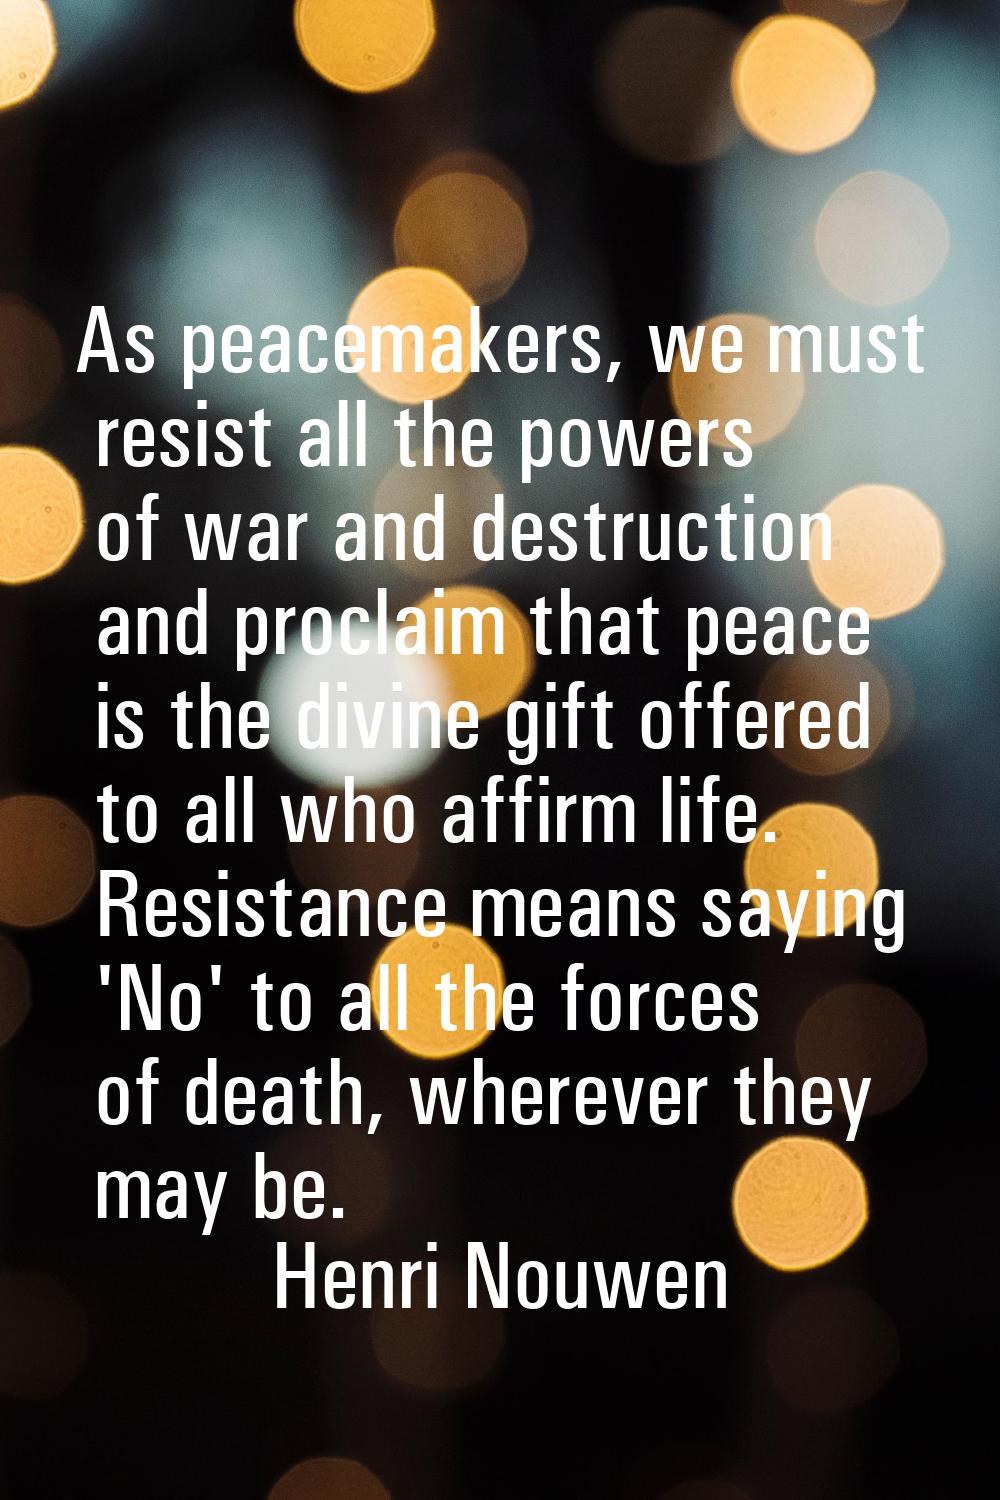 As peacemakers, we must resist all the powers of war and destruction and proclaim that peace is the